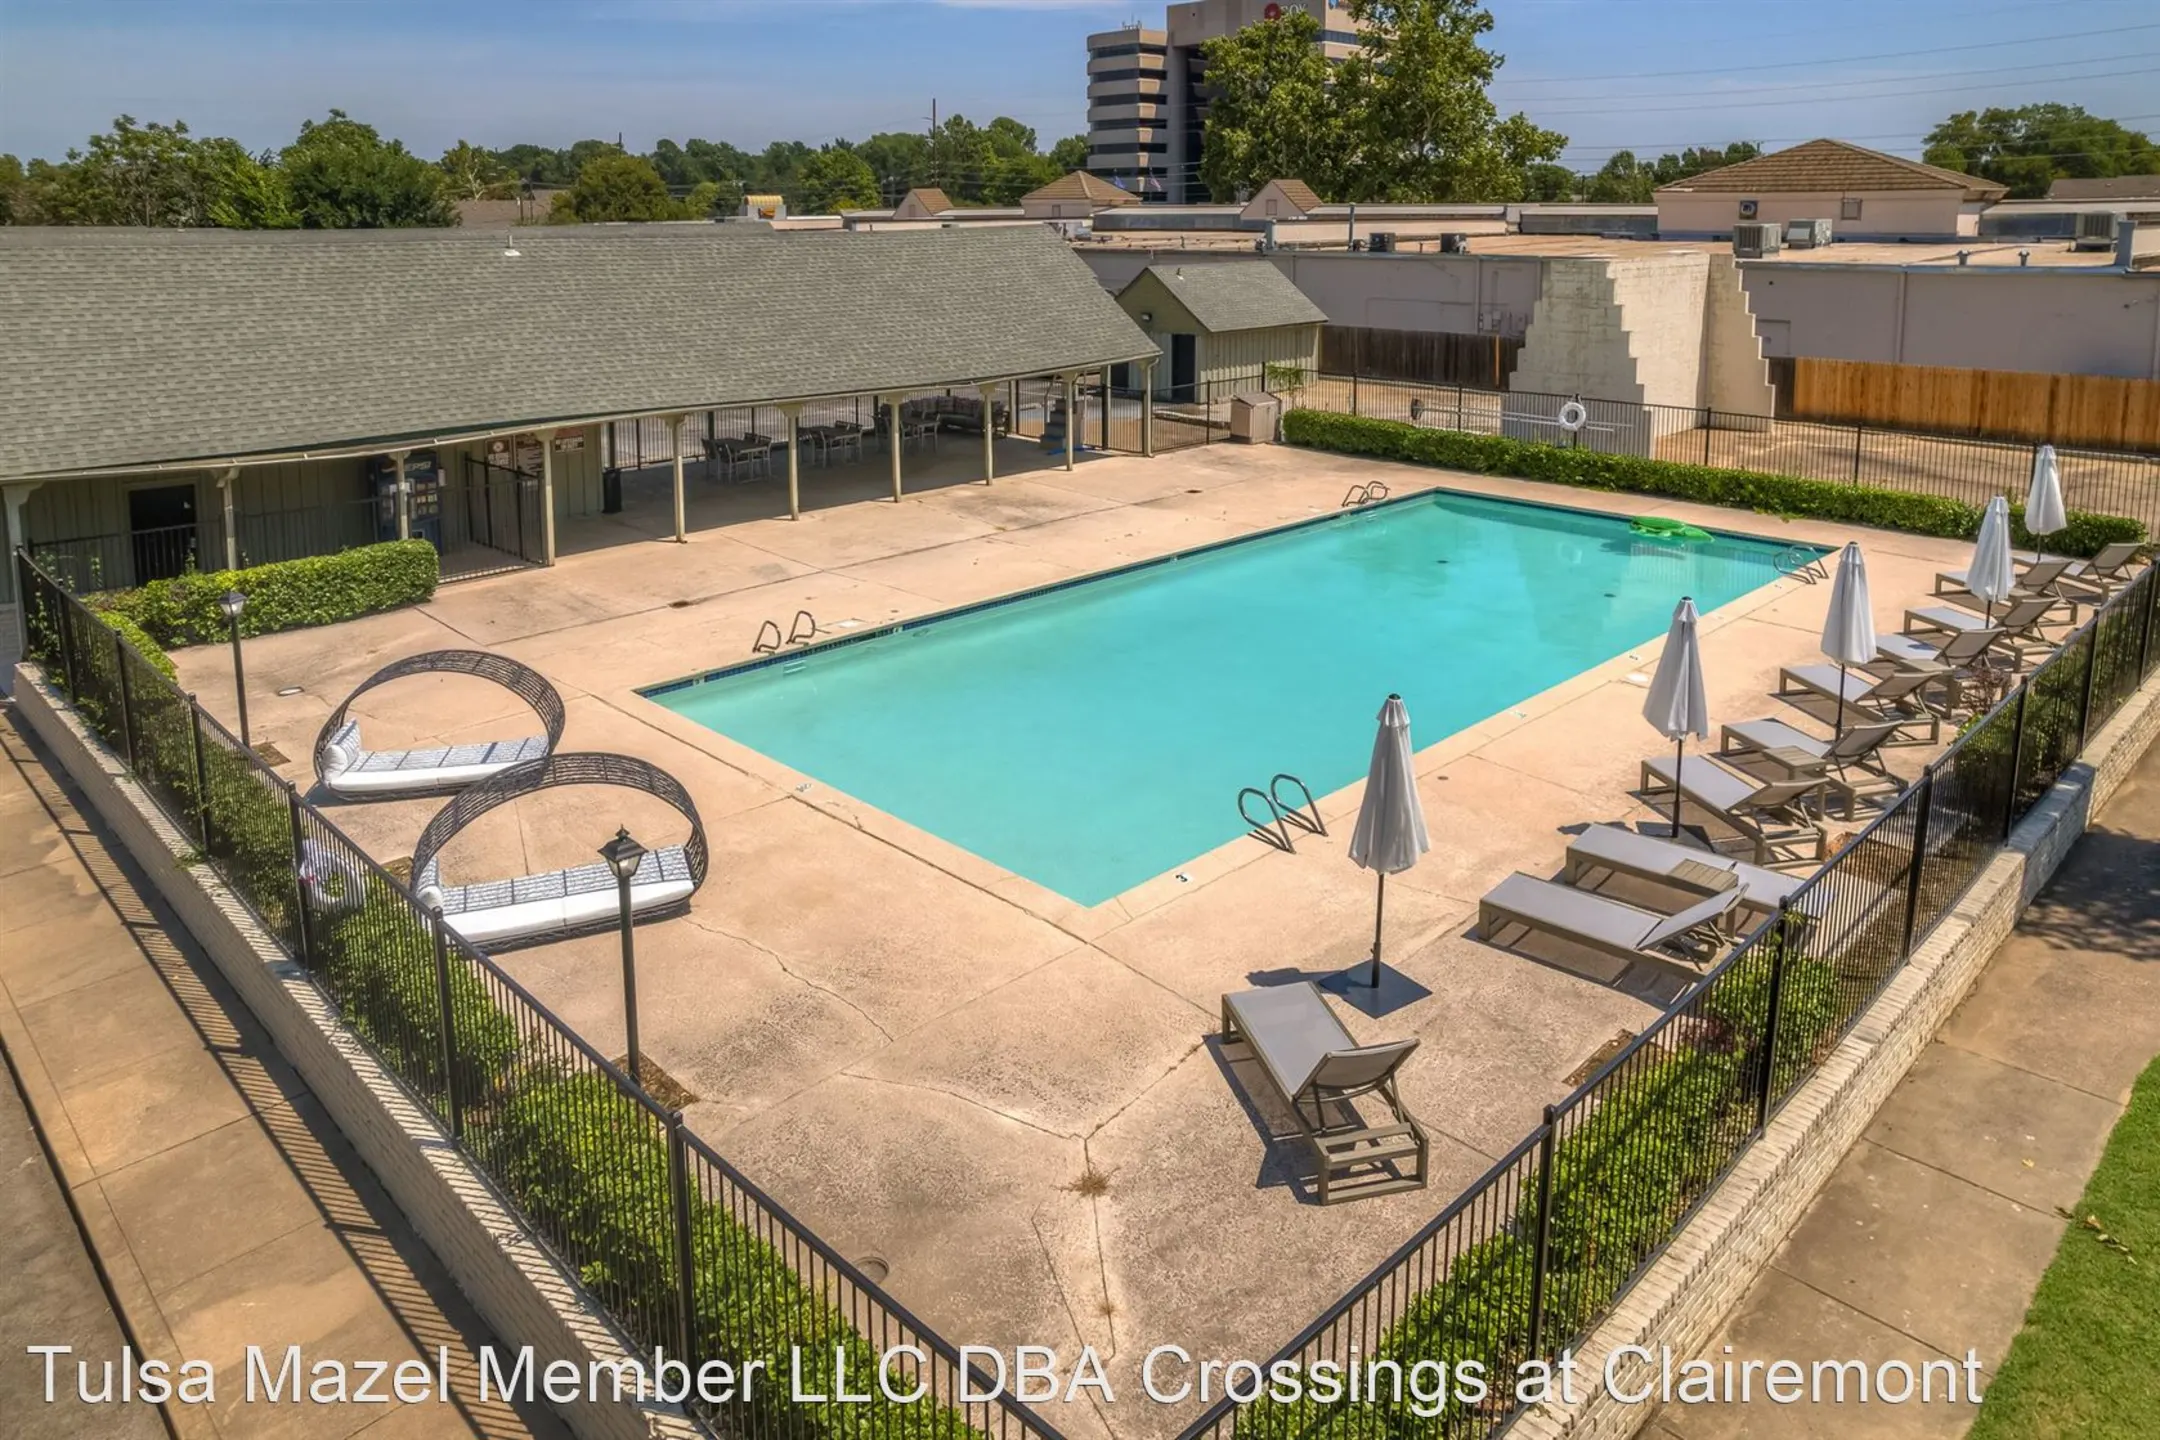 Pool - Crossings at Clairemont - Tulsa, OK